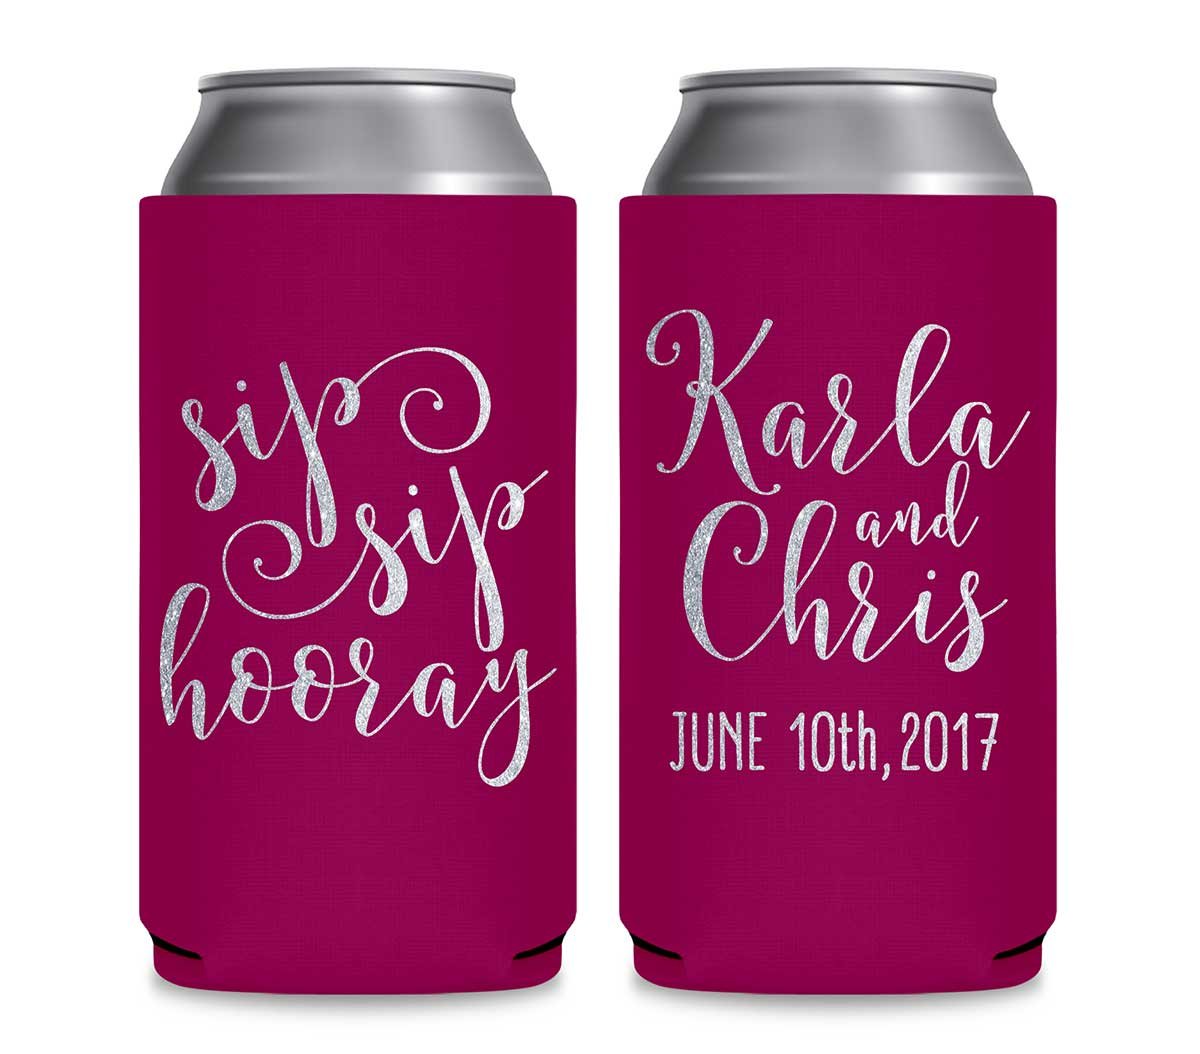 Sip Sip Hooray 1A Foldable 12 oz Slim Can Koozies Wedding Gifts for Guests